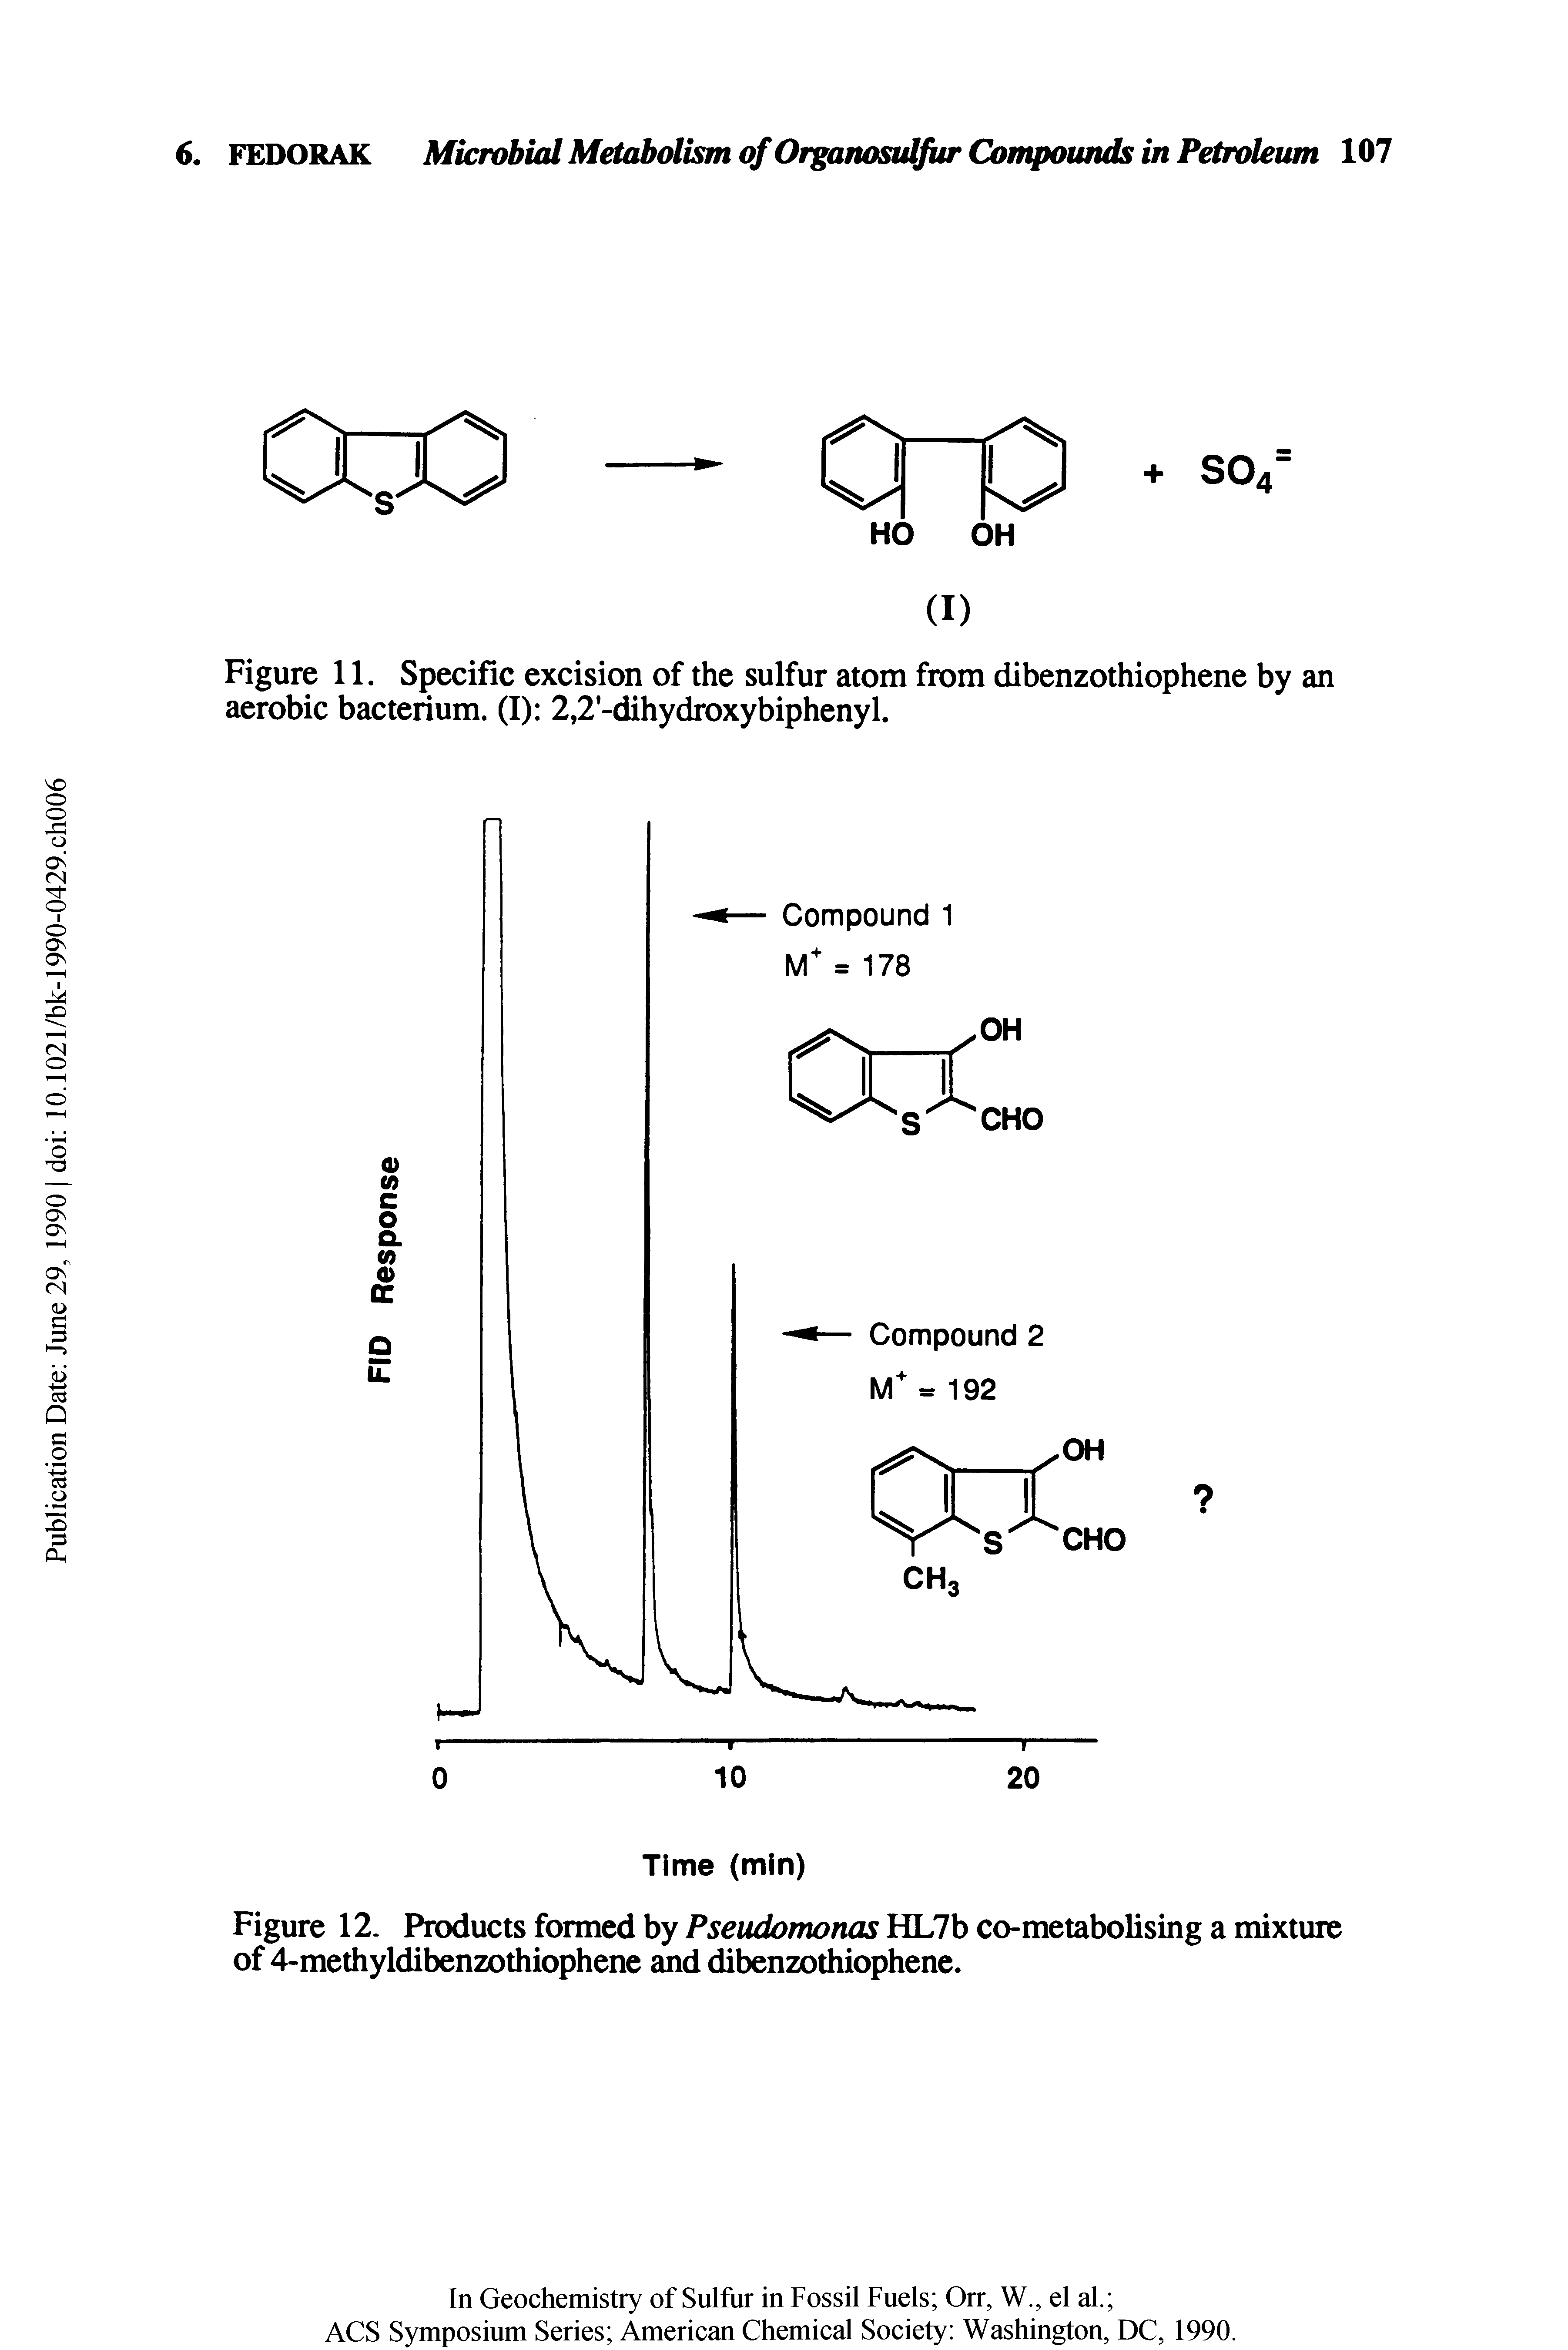 Figure 11. Specific excision of the sulfur atom from dibenzothiophene by an aerobic bacterium. (I) 2,2-dihydroxybiphenyl.